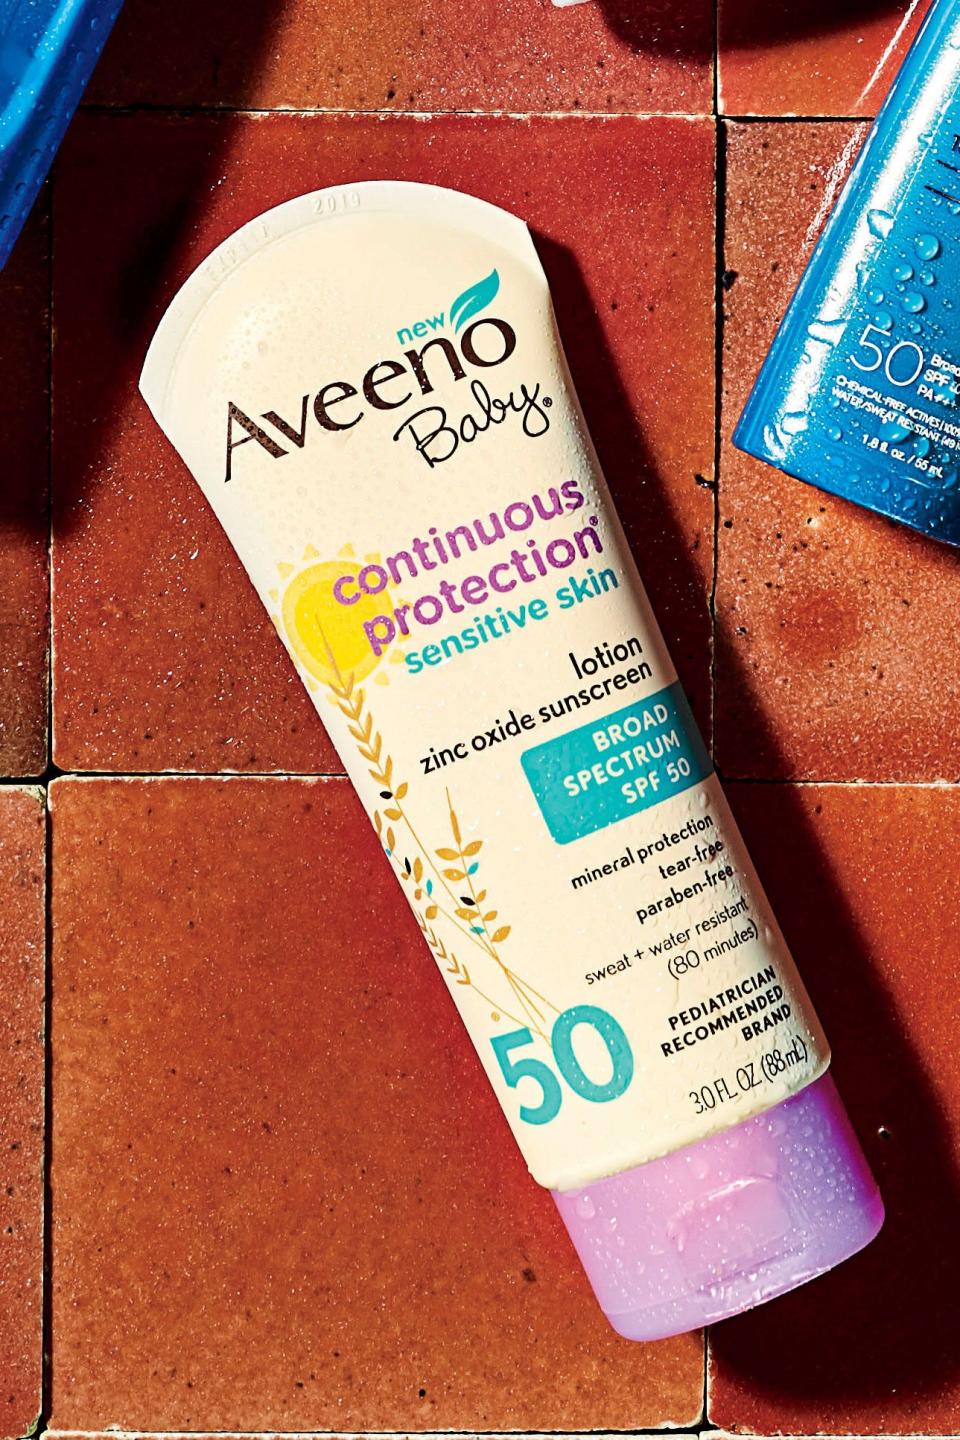 Aveeno Baby Continuous Protection Zinc Oxide Sunscreen SPF 50